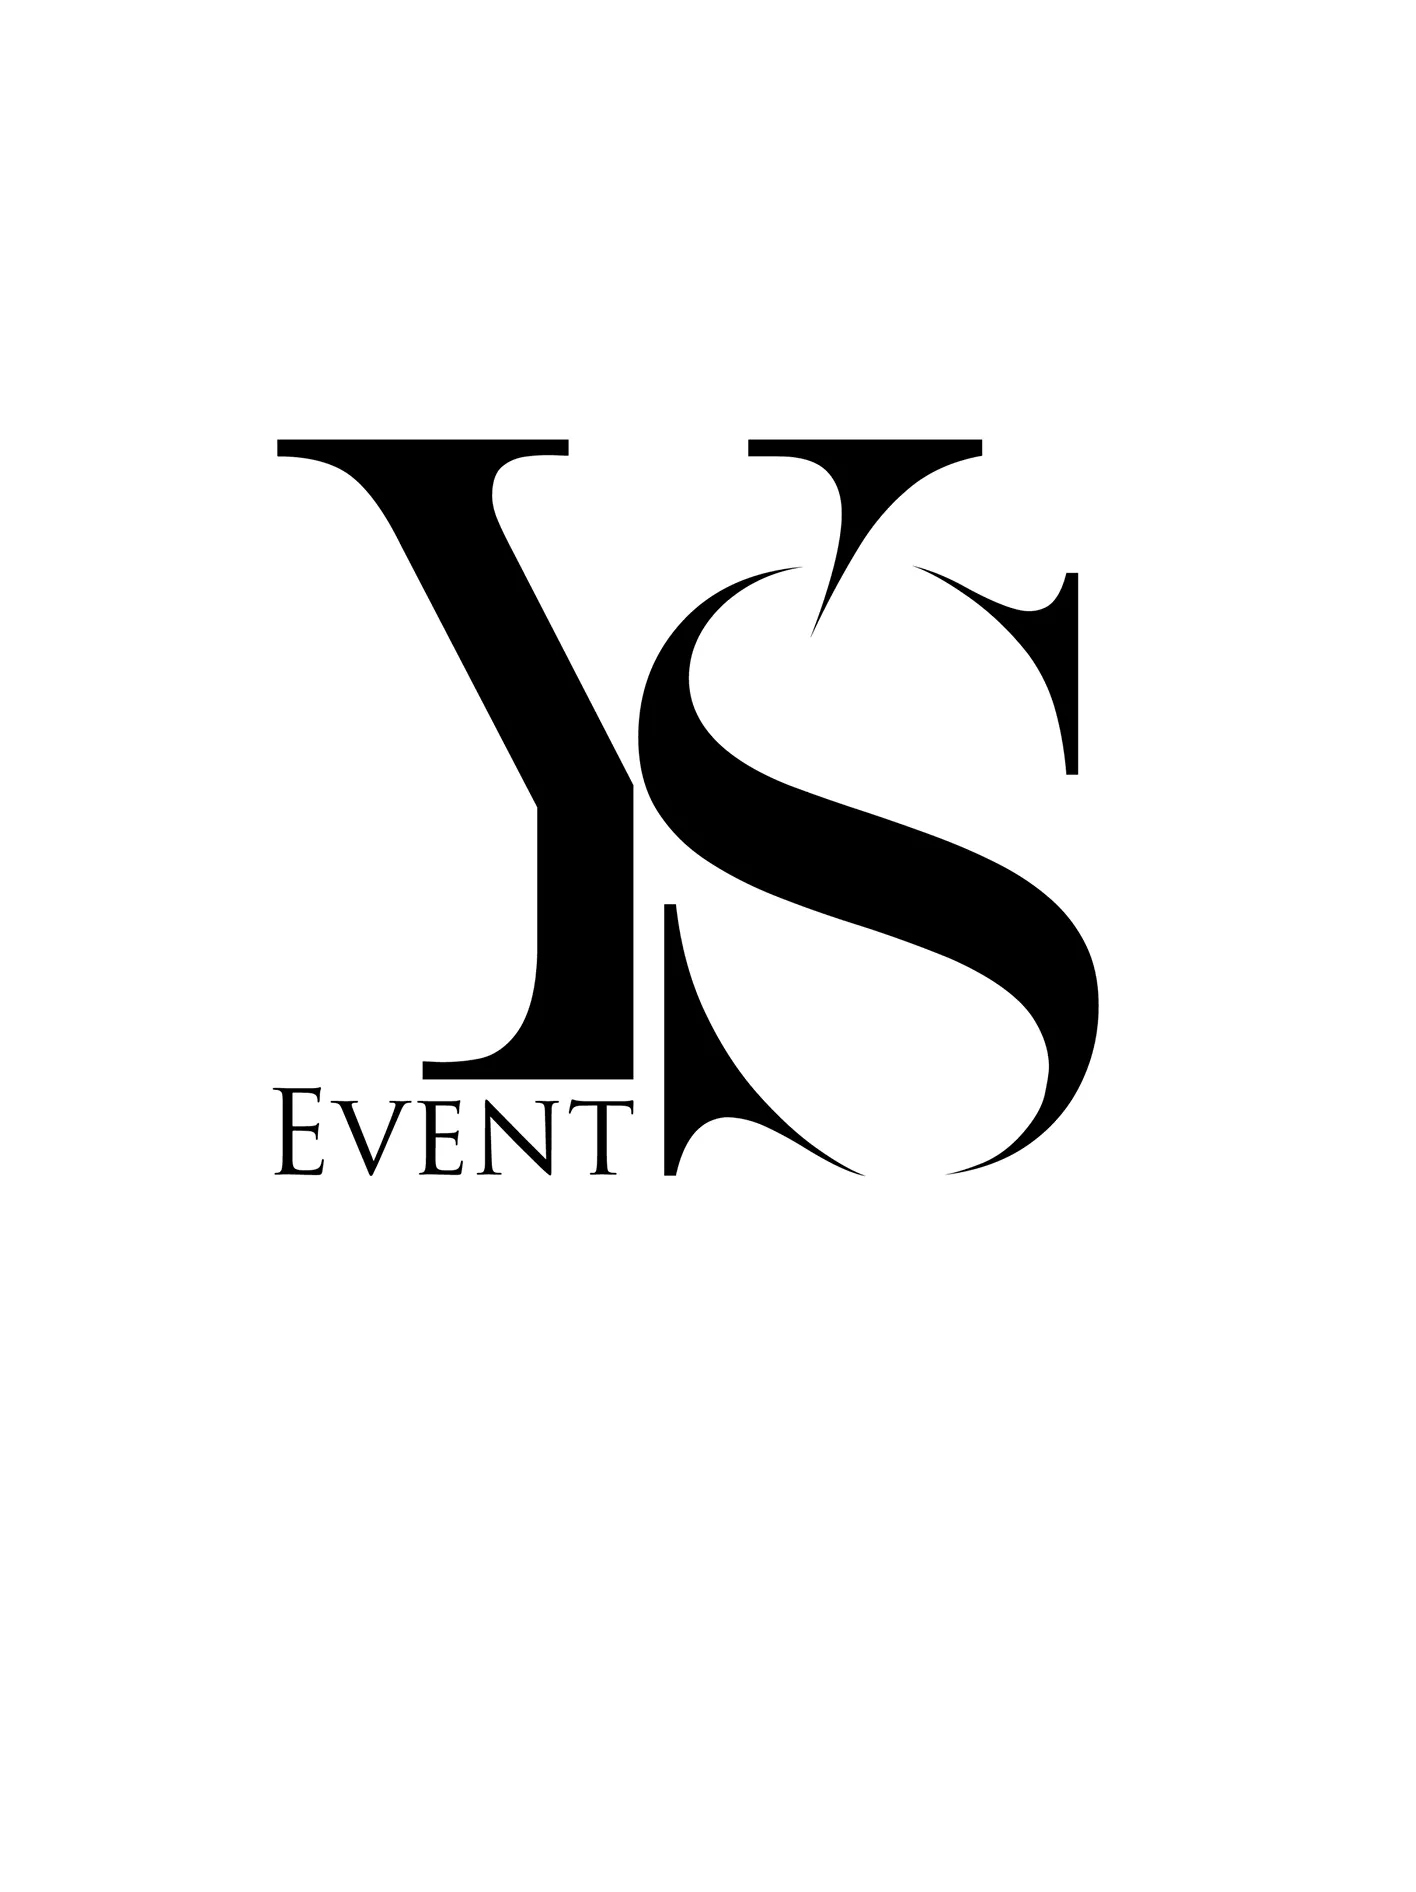 YS Event